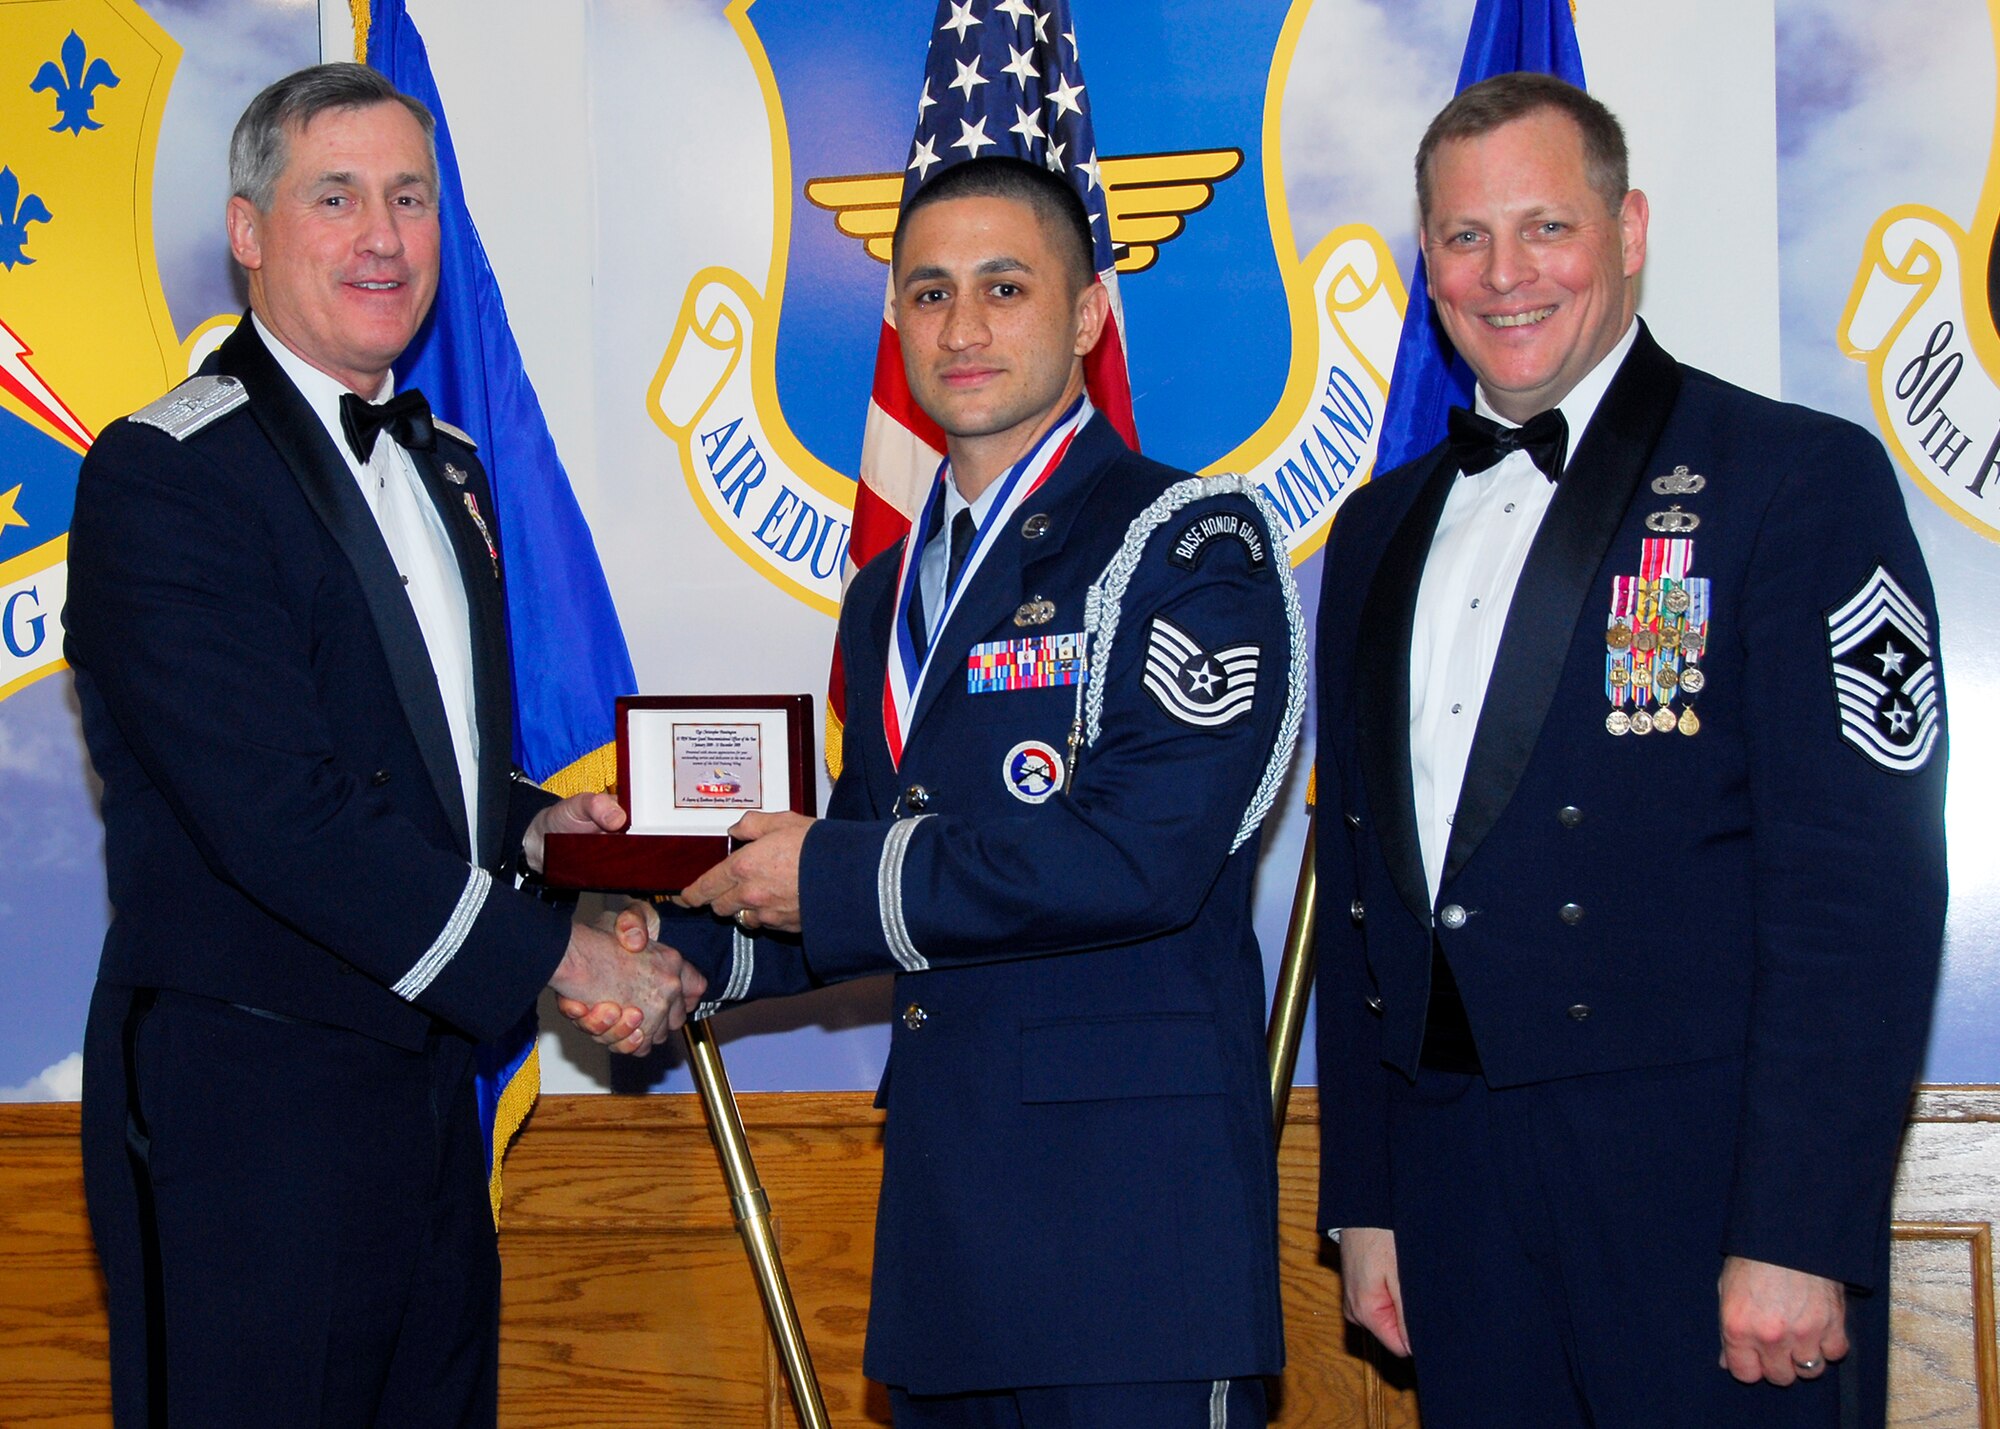 Brig. Gen. O.G. Mannon, 82nd Training Wing commander, presents Tech. Sgt. Christopher Huntington, 361st Training Squadron, with the Honor Guard NCO of the Year award March 5 during the 2009 82nd TRW Annual Awards banquet. Also pictured is wing Command Chief, Chief Master Sgt. Kenneth Sallinger. (U.S. Air Force photo/Harry Tonemah) 